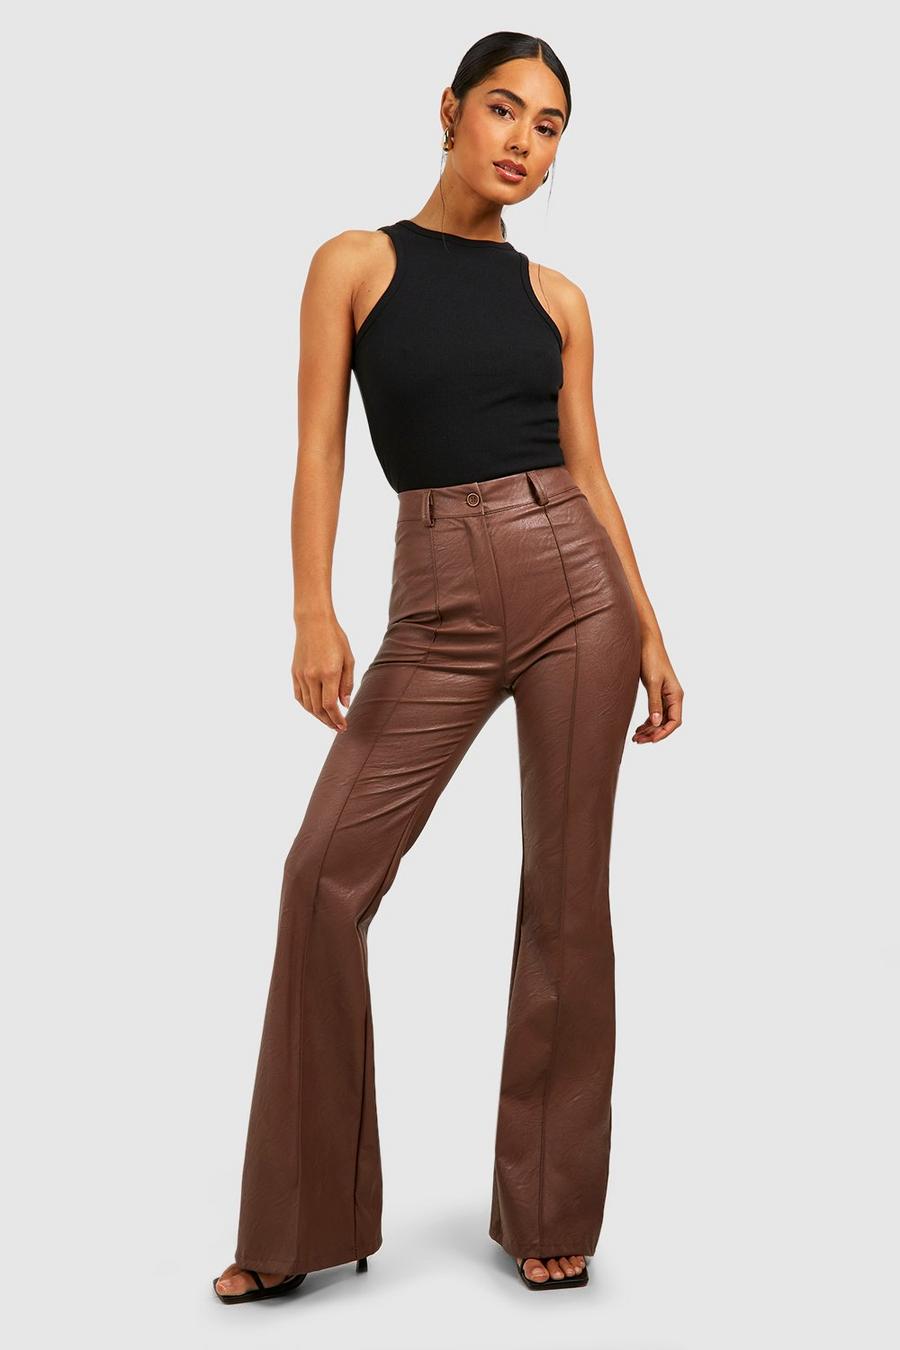 Chocolate brown Leather Look High Waisted Seam Front Flared Trousers